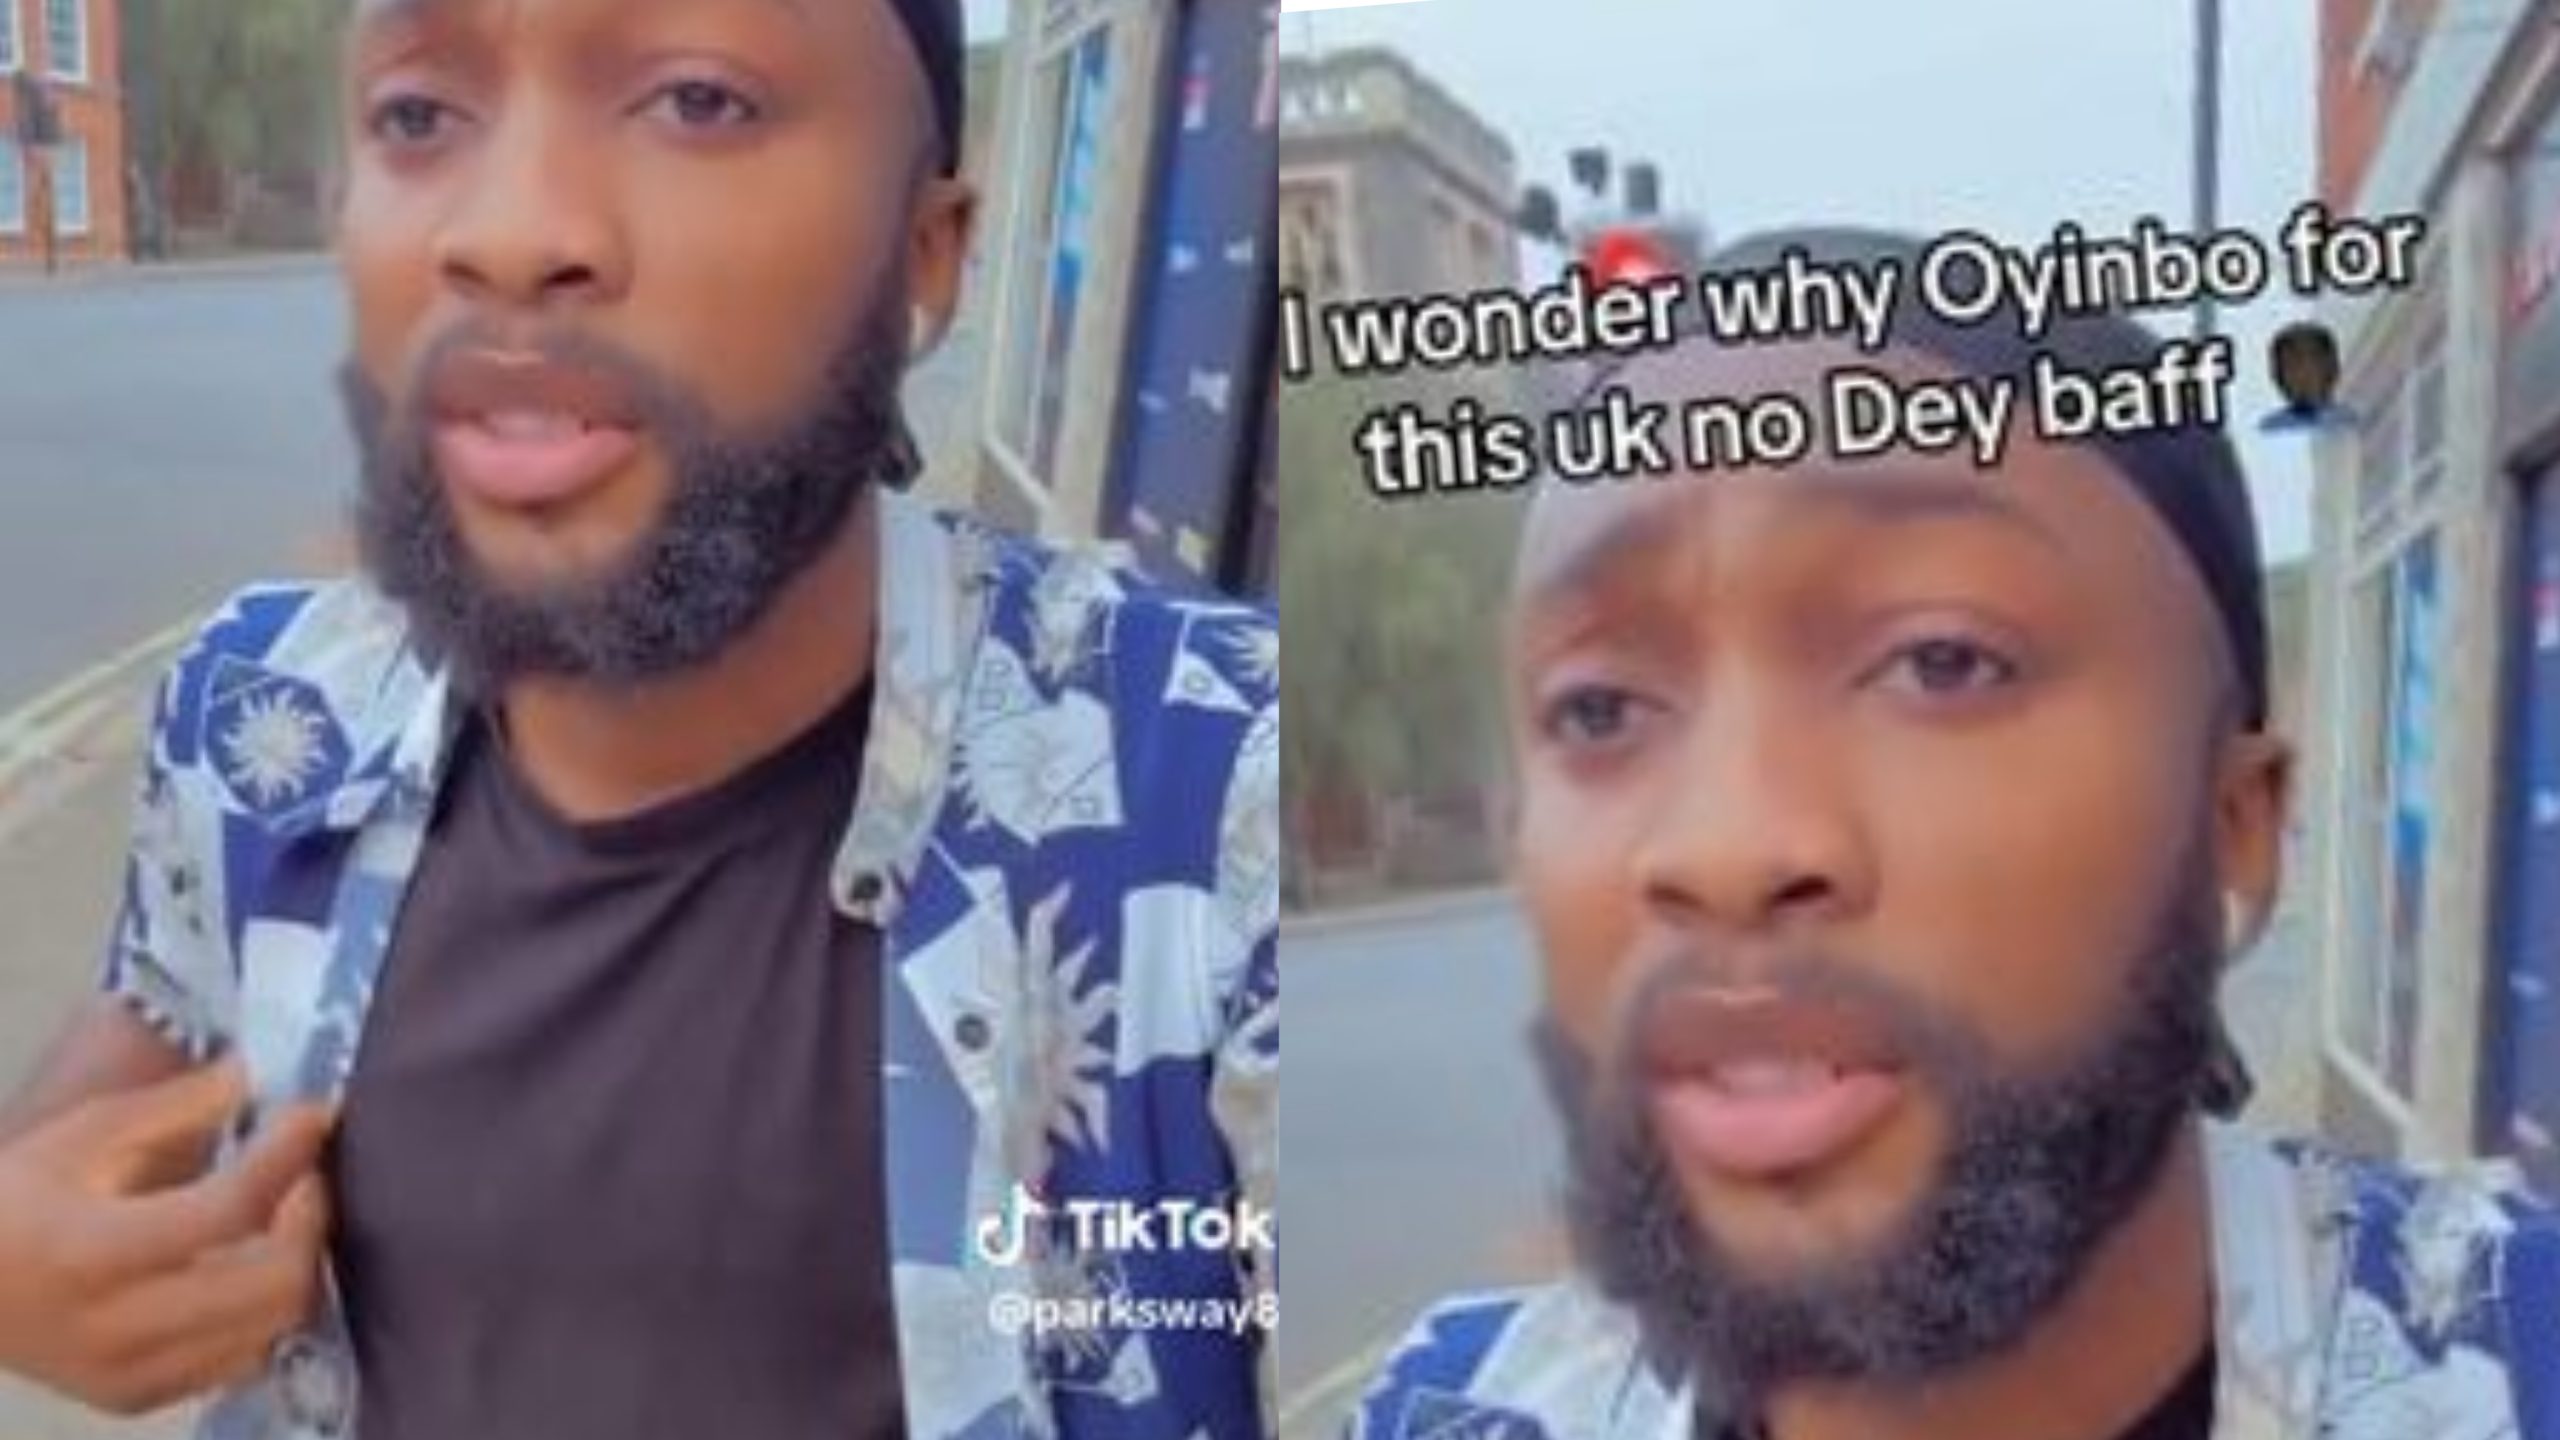 "The Oyinbo people in UK Don't shower, I have catarrh because of it" — Nigerian man cries out 